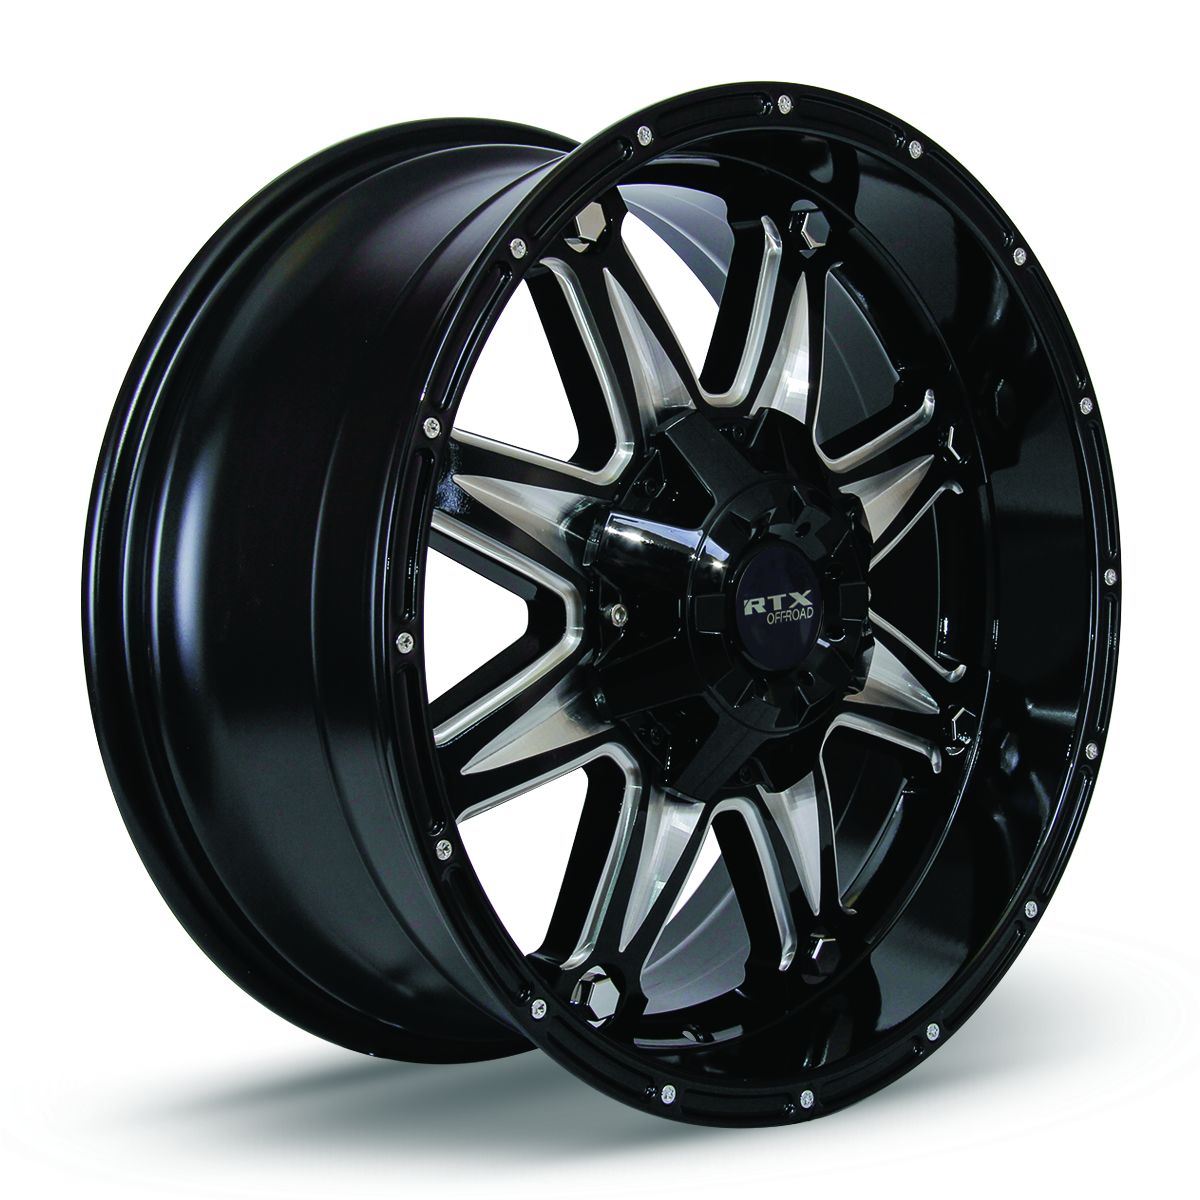 Spine • Black with Milled Spokes • 18x9 6x135/139.7 ET10 CB87.1